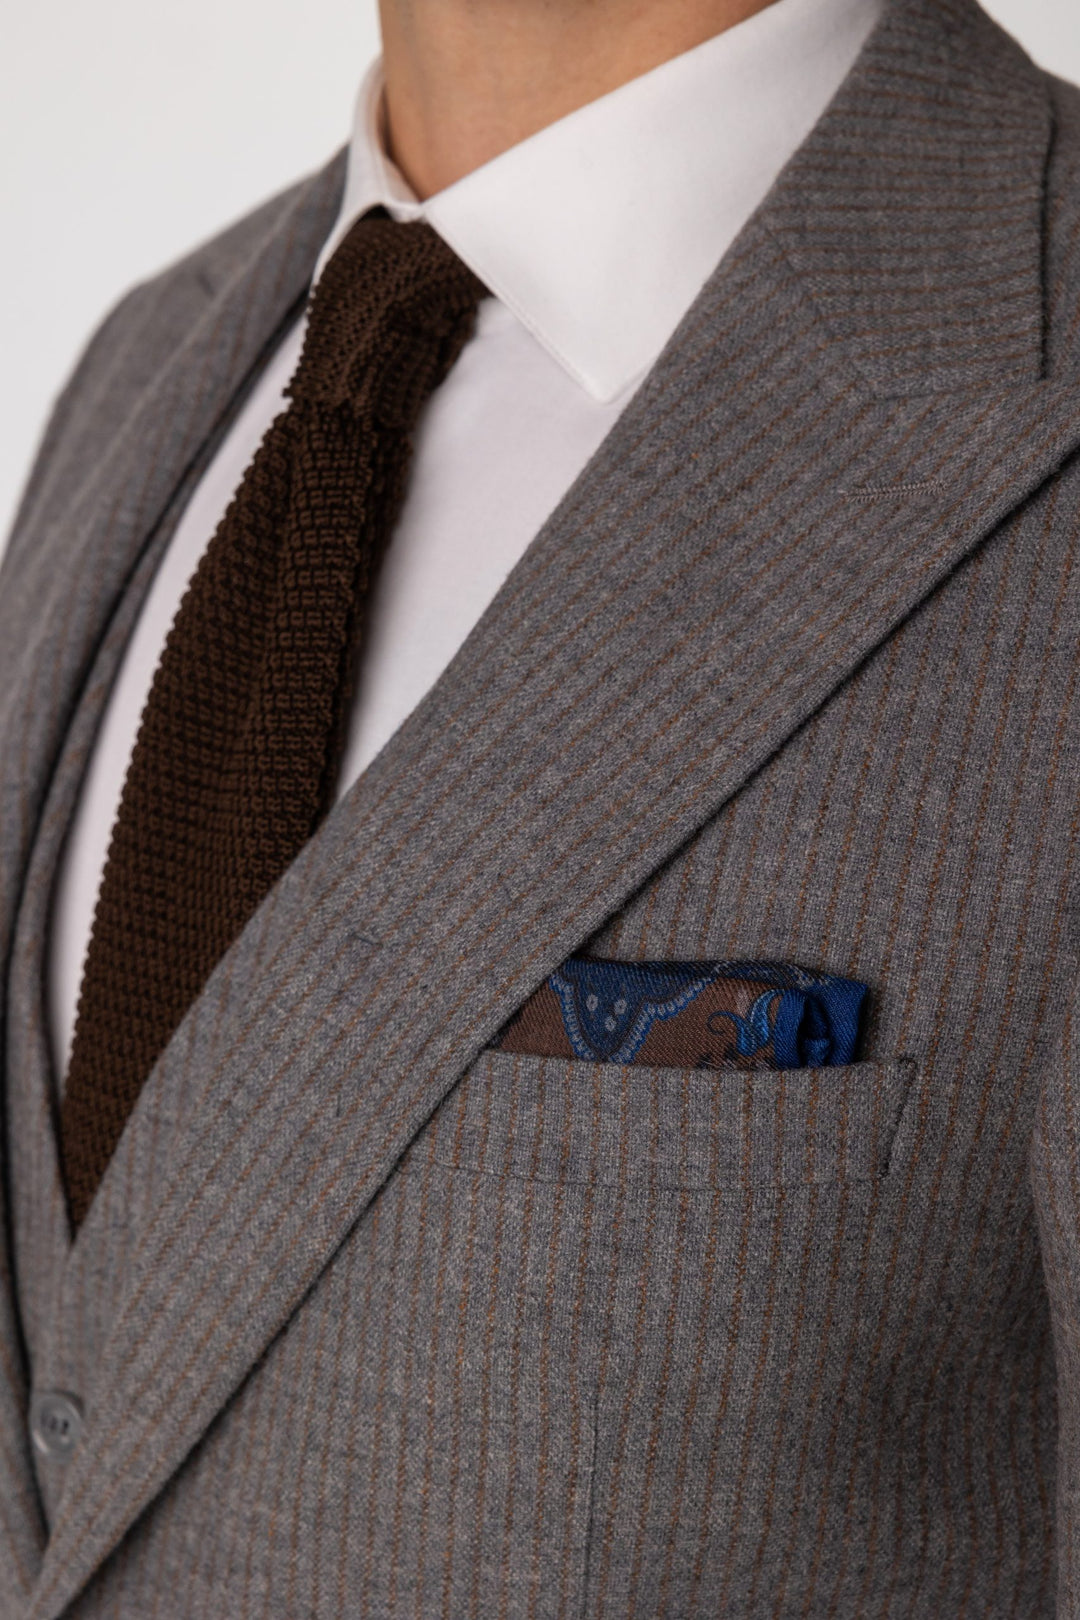 Three-piece gray suit with brown stripes